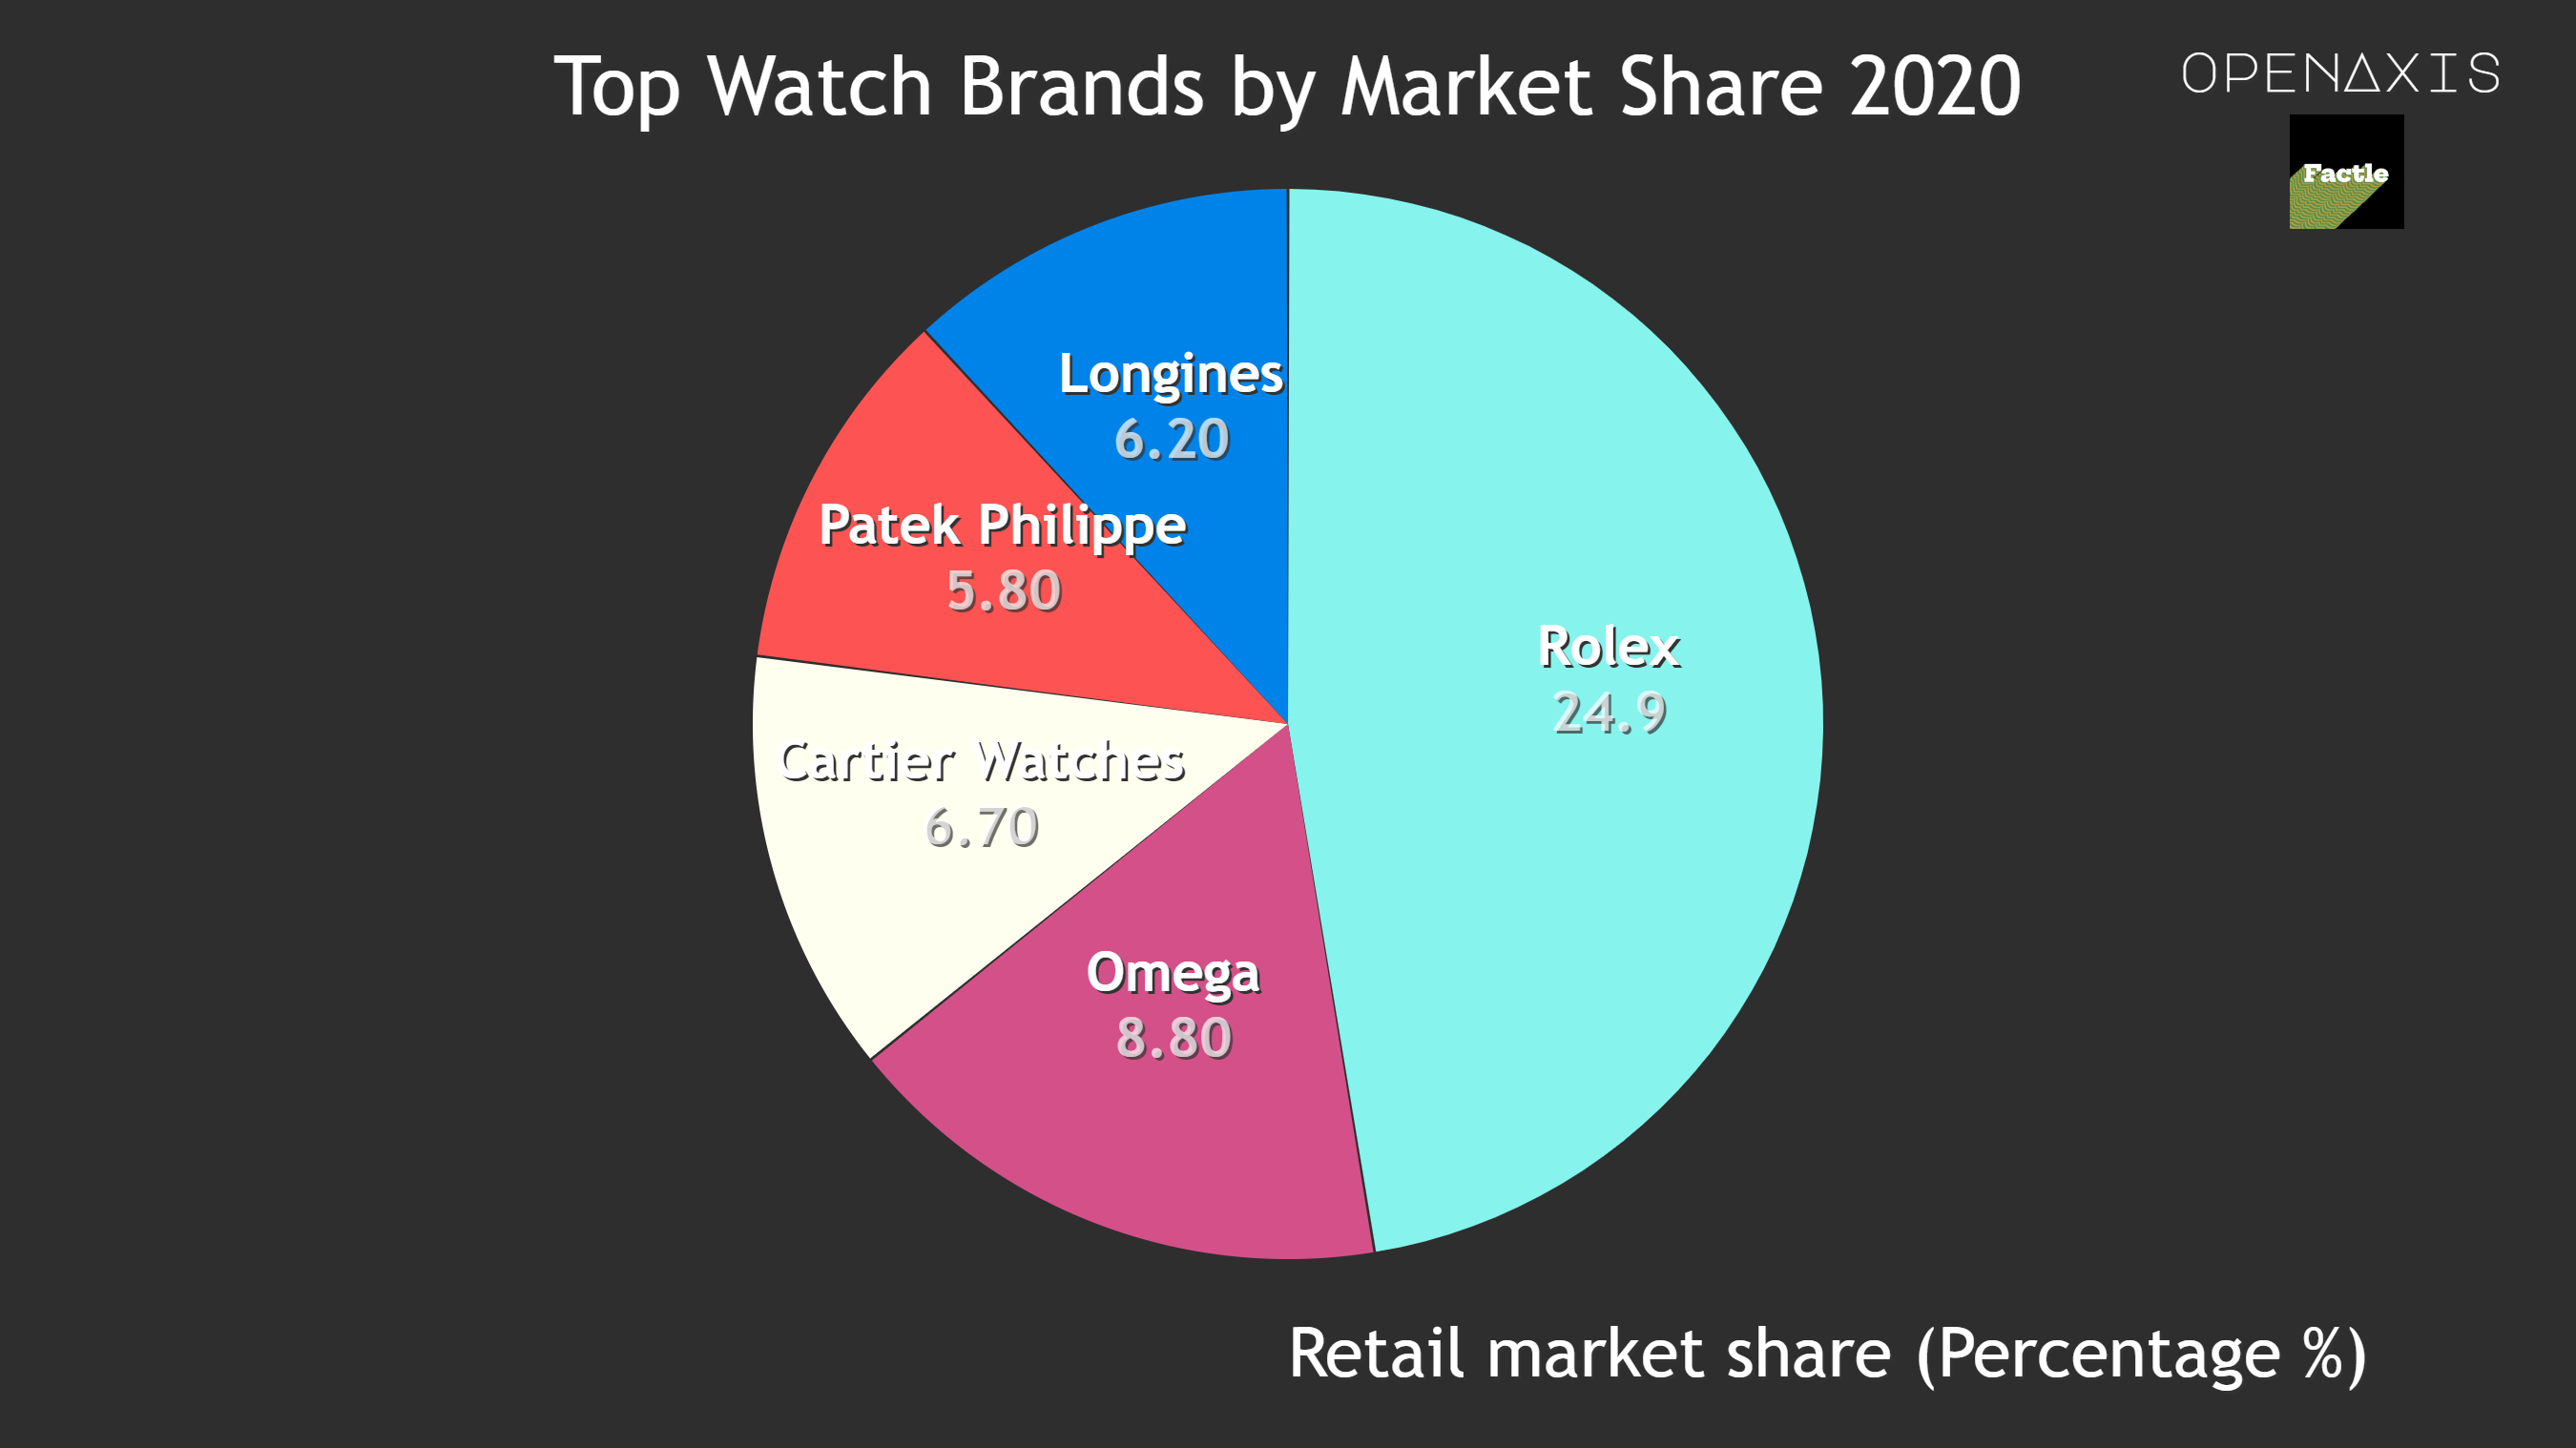 "Top Watch Brands by Market Share 2020"